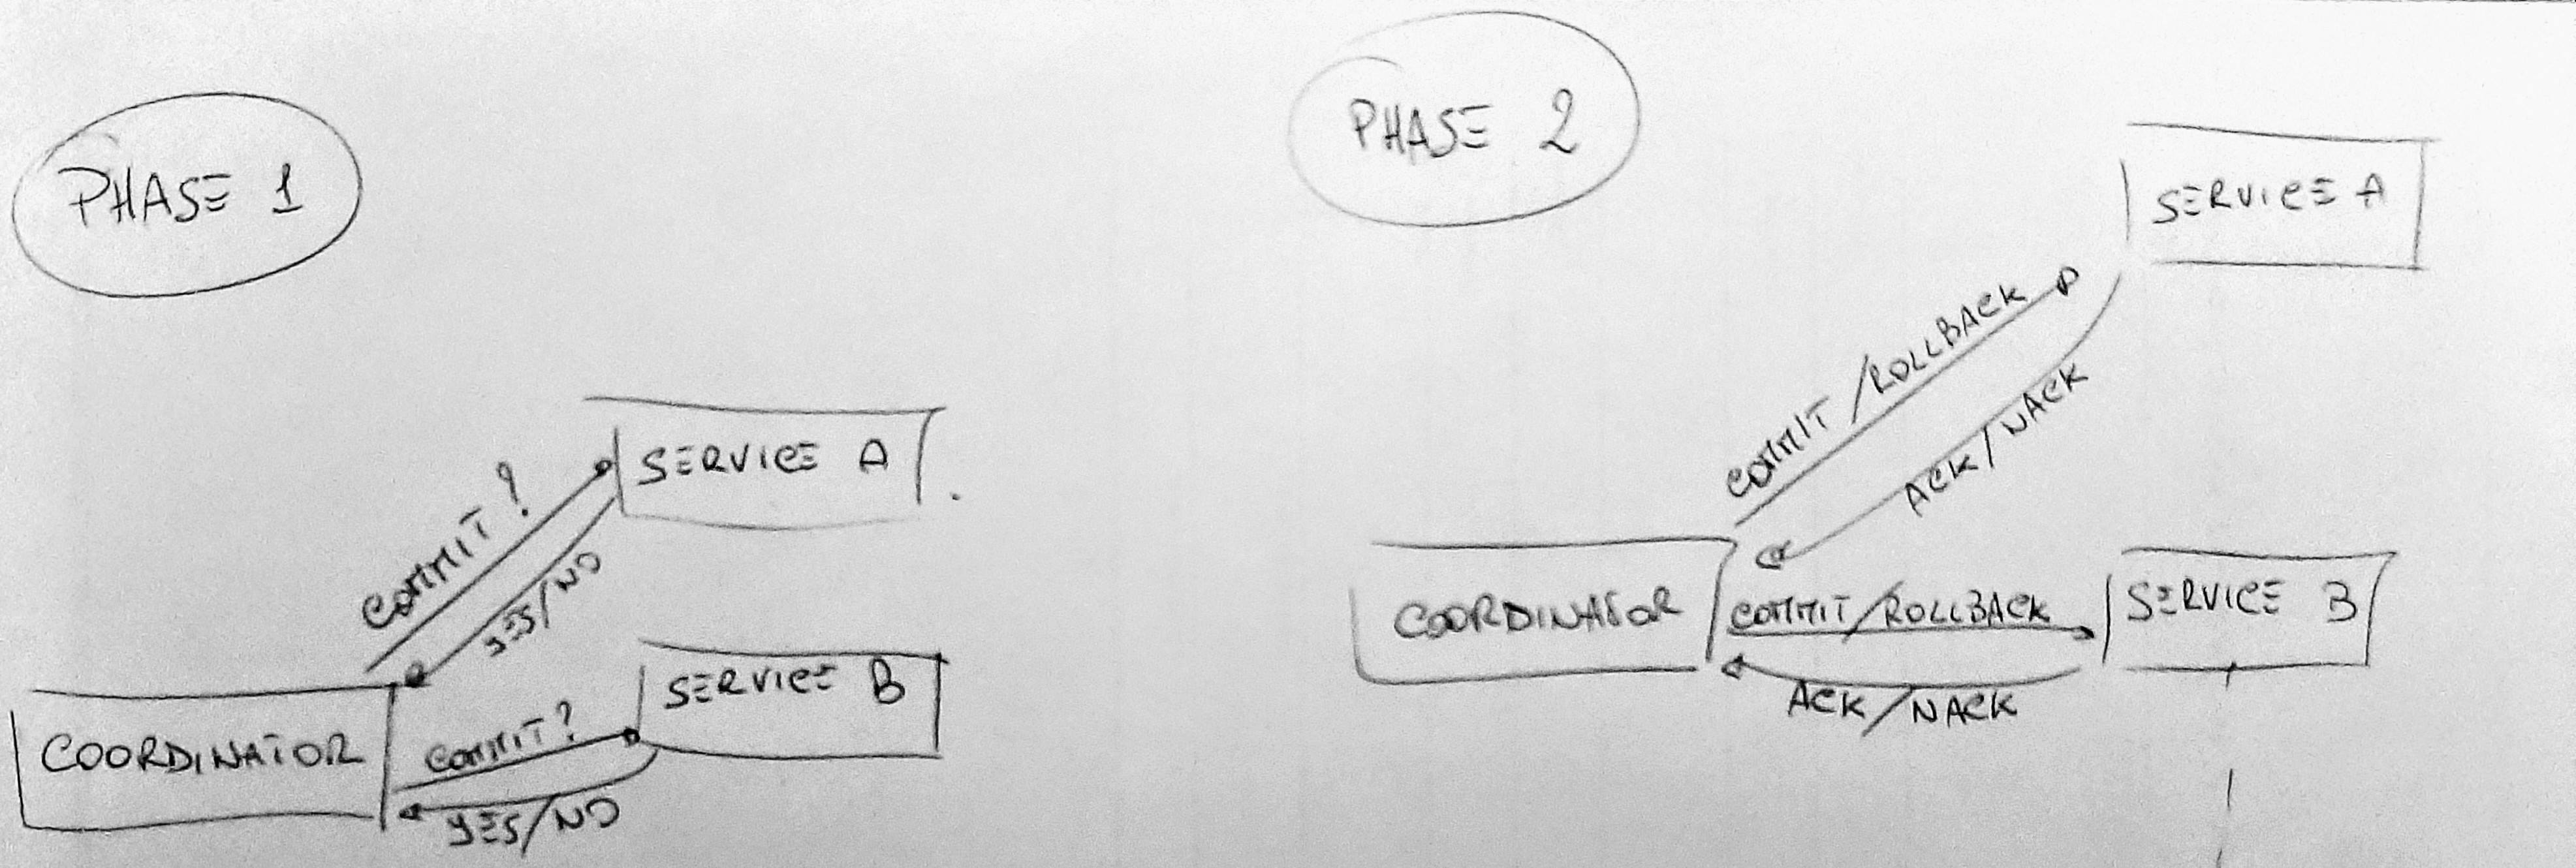 Two Phase Commit